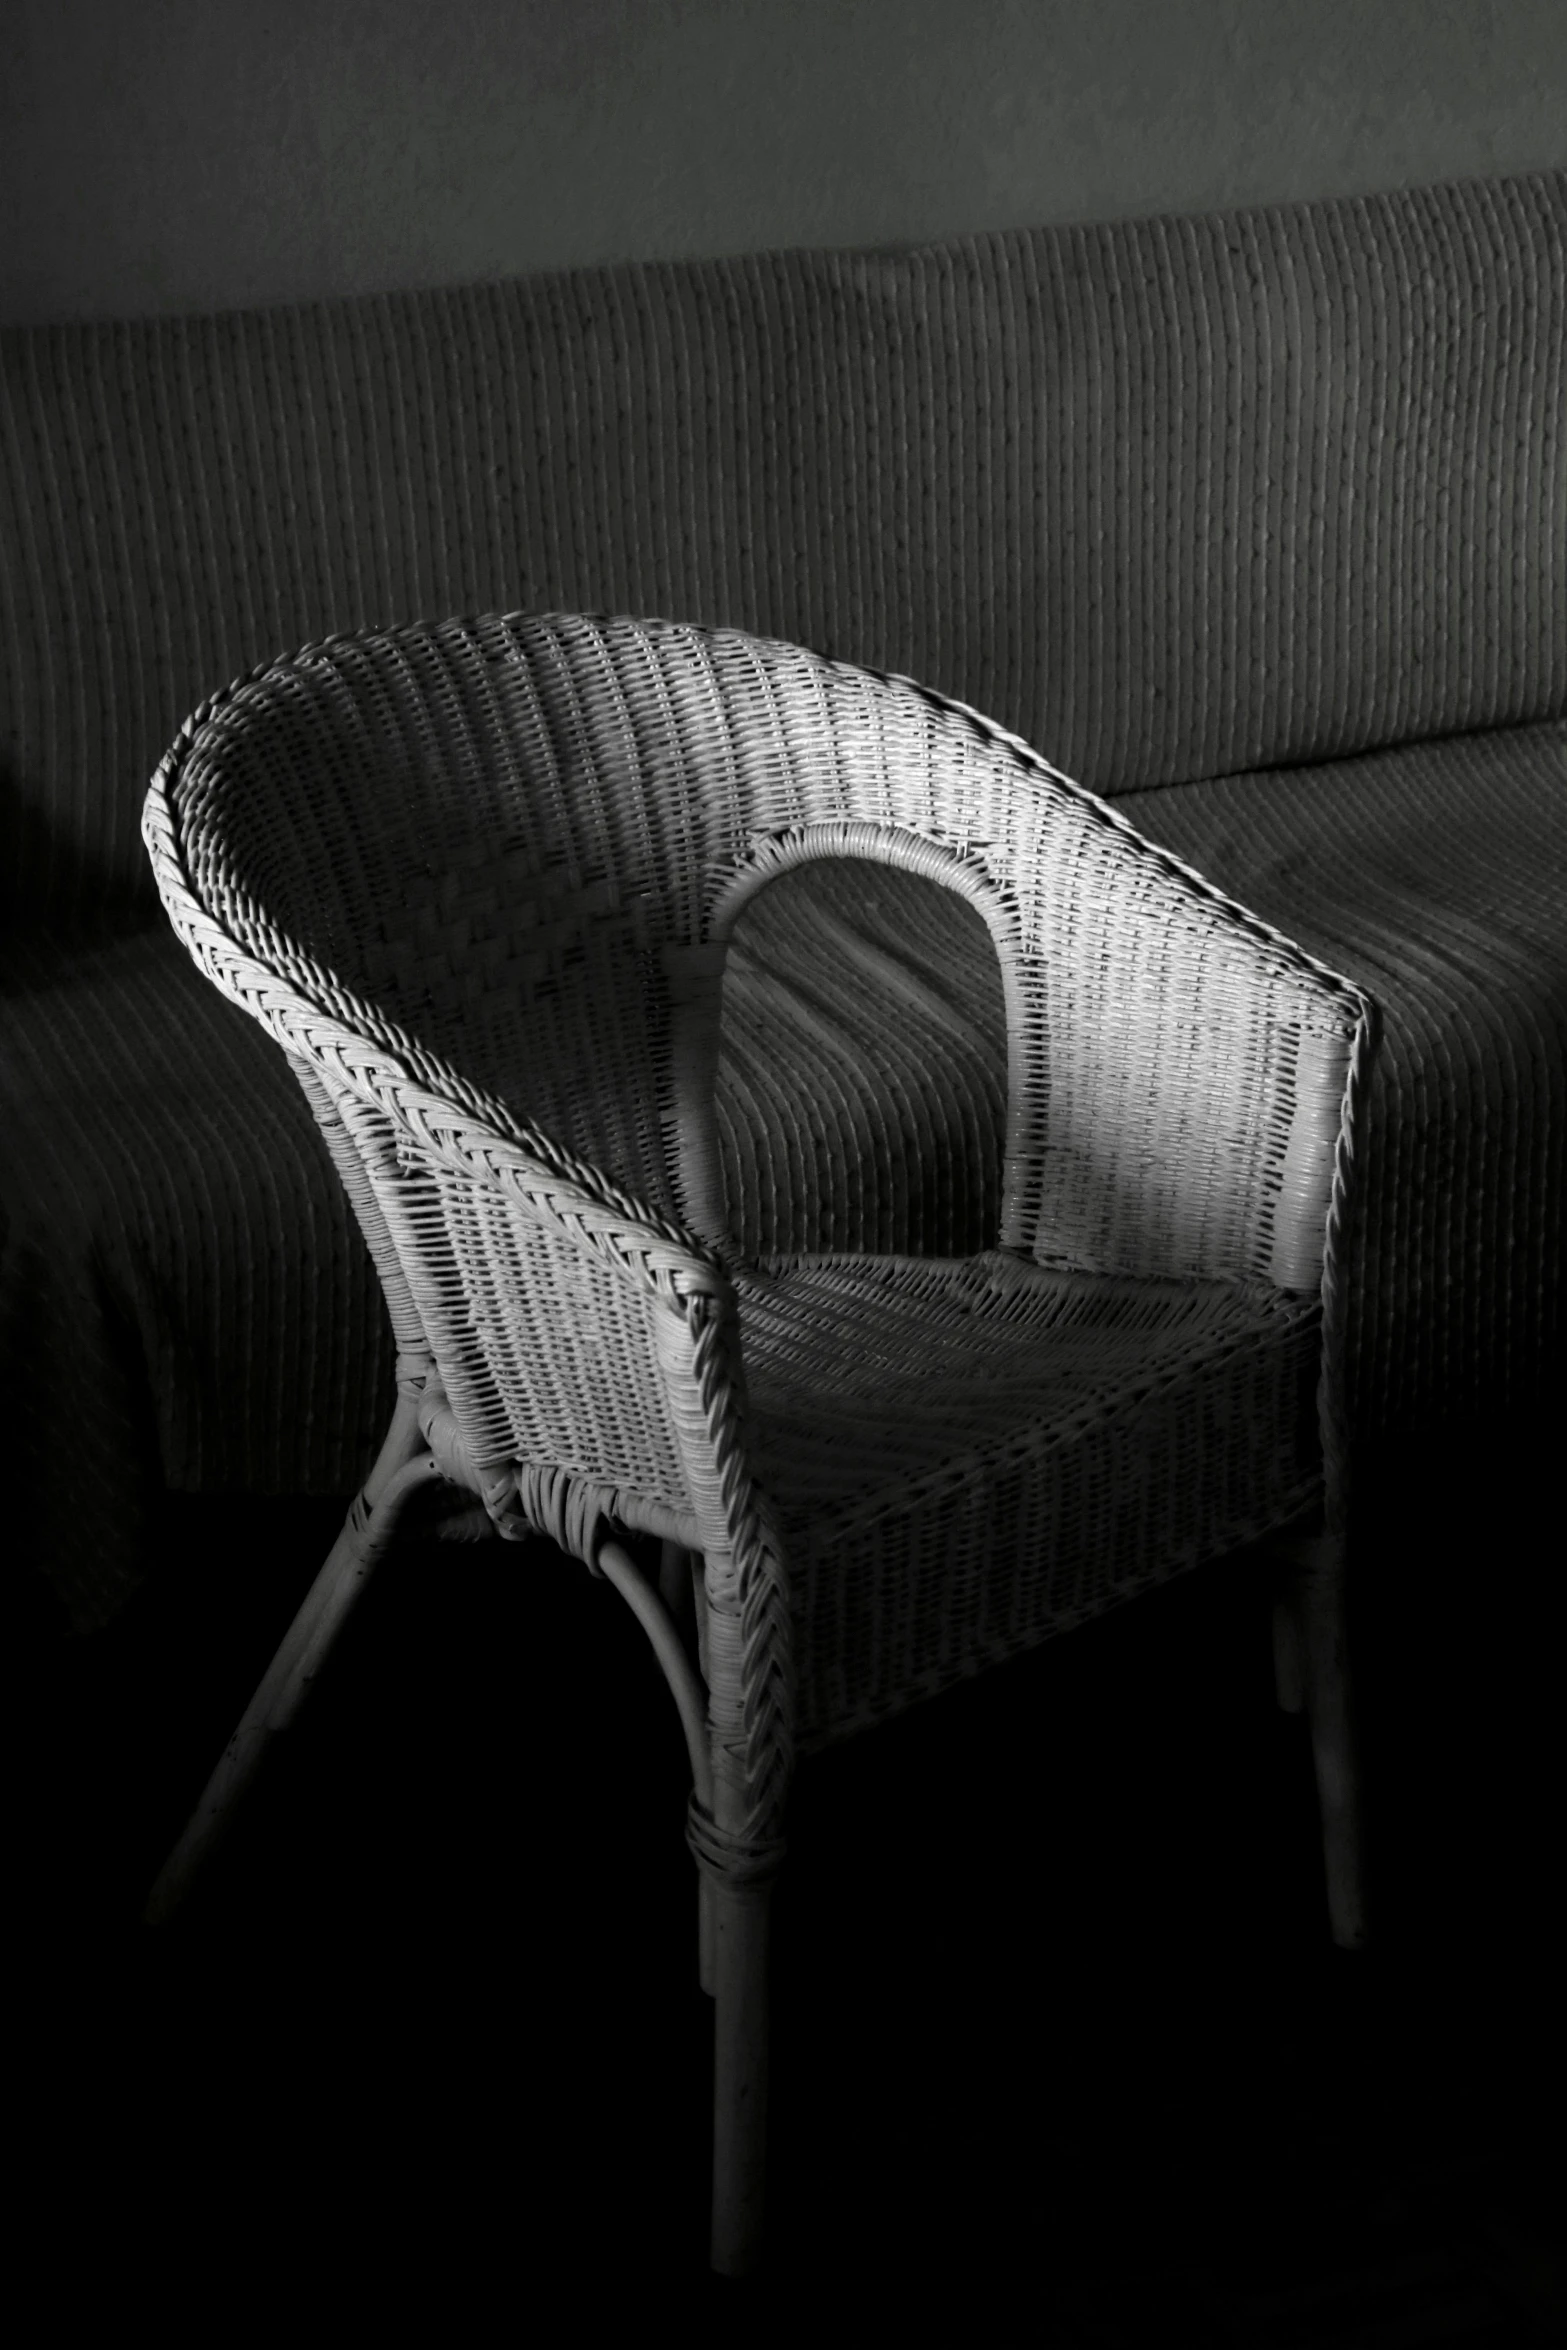 a wicker sofa and chair in a dark room